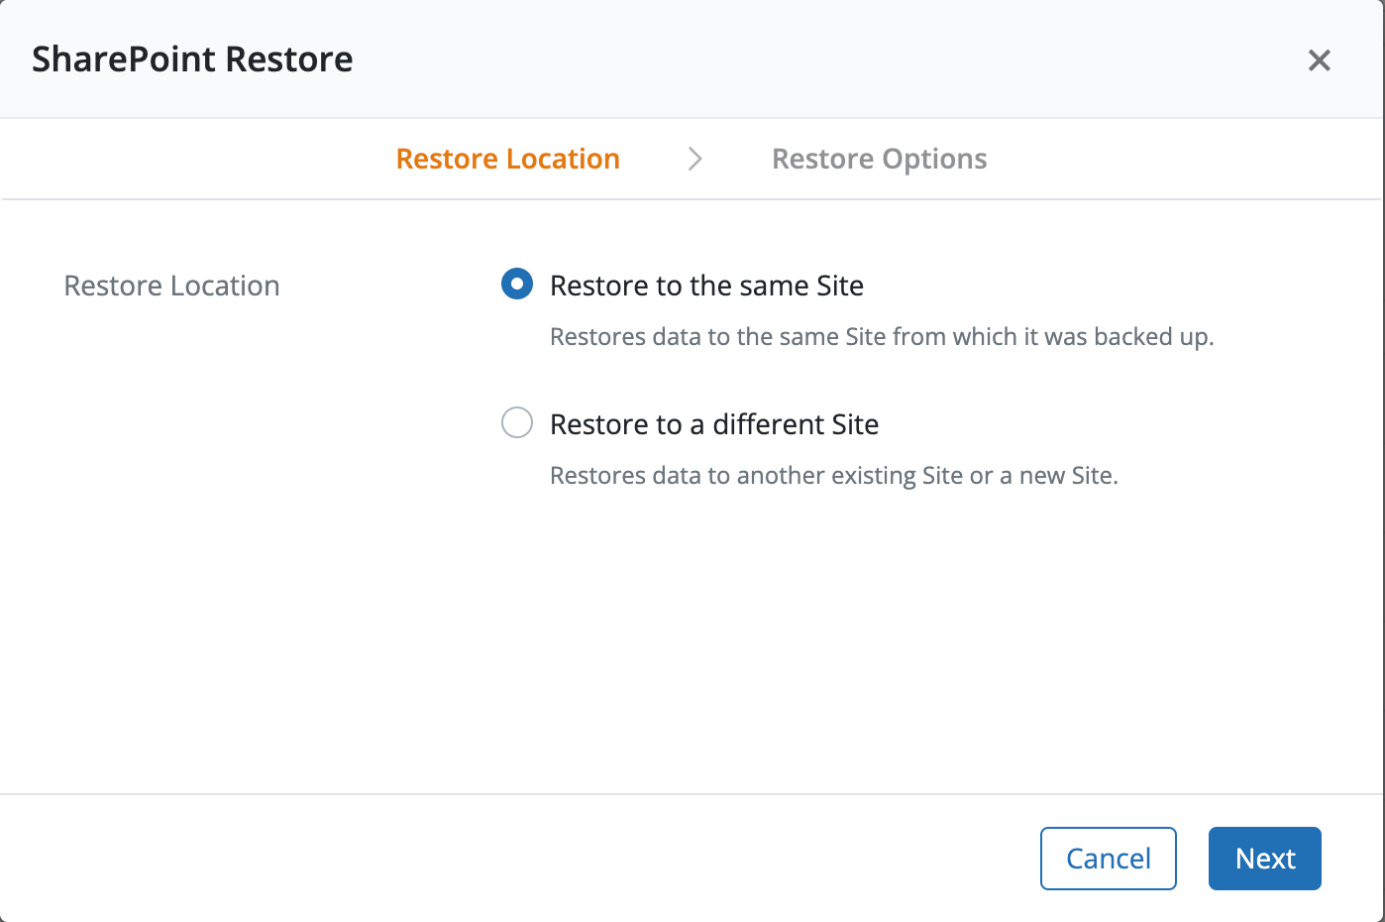 You can choose the restore location